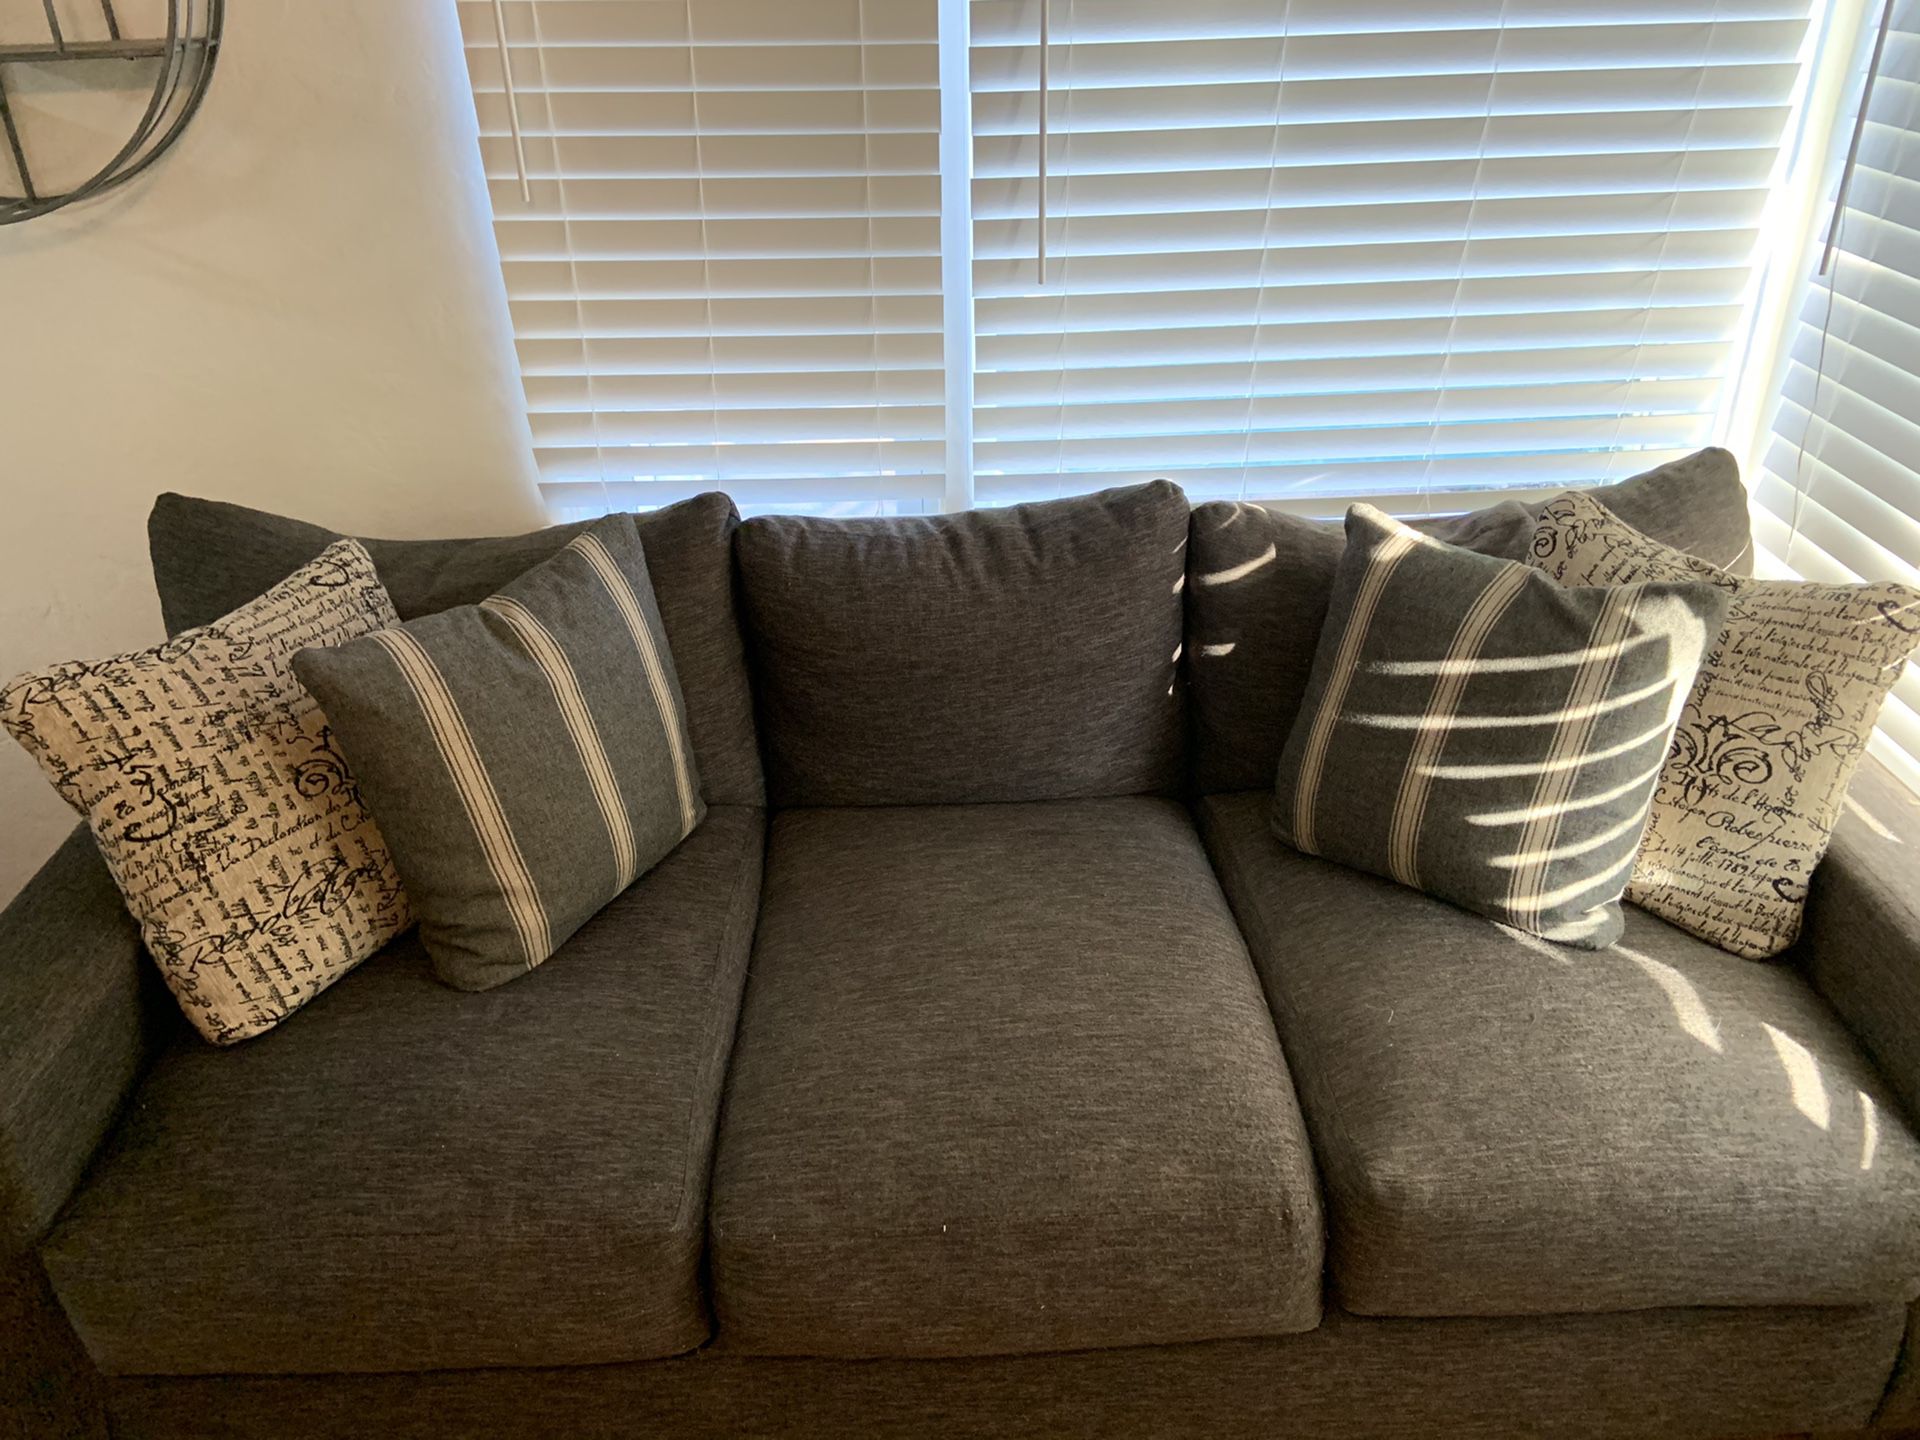 Two Comfy Deep-Cushion Couch Set